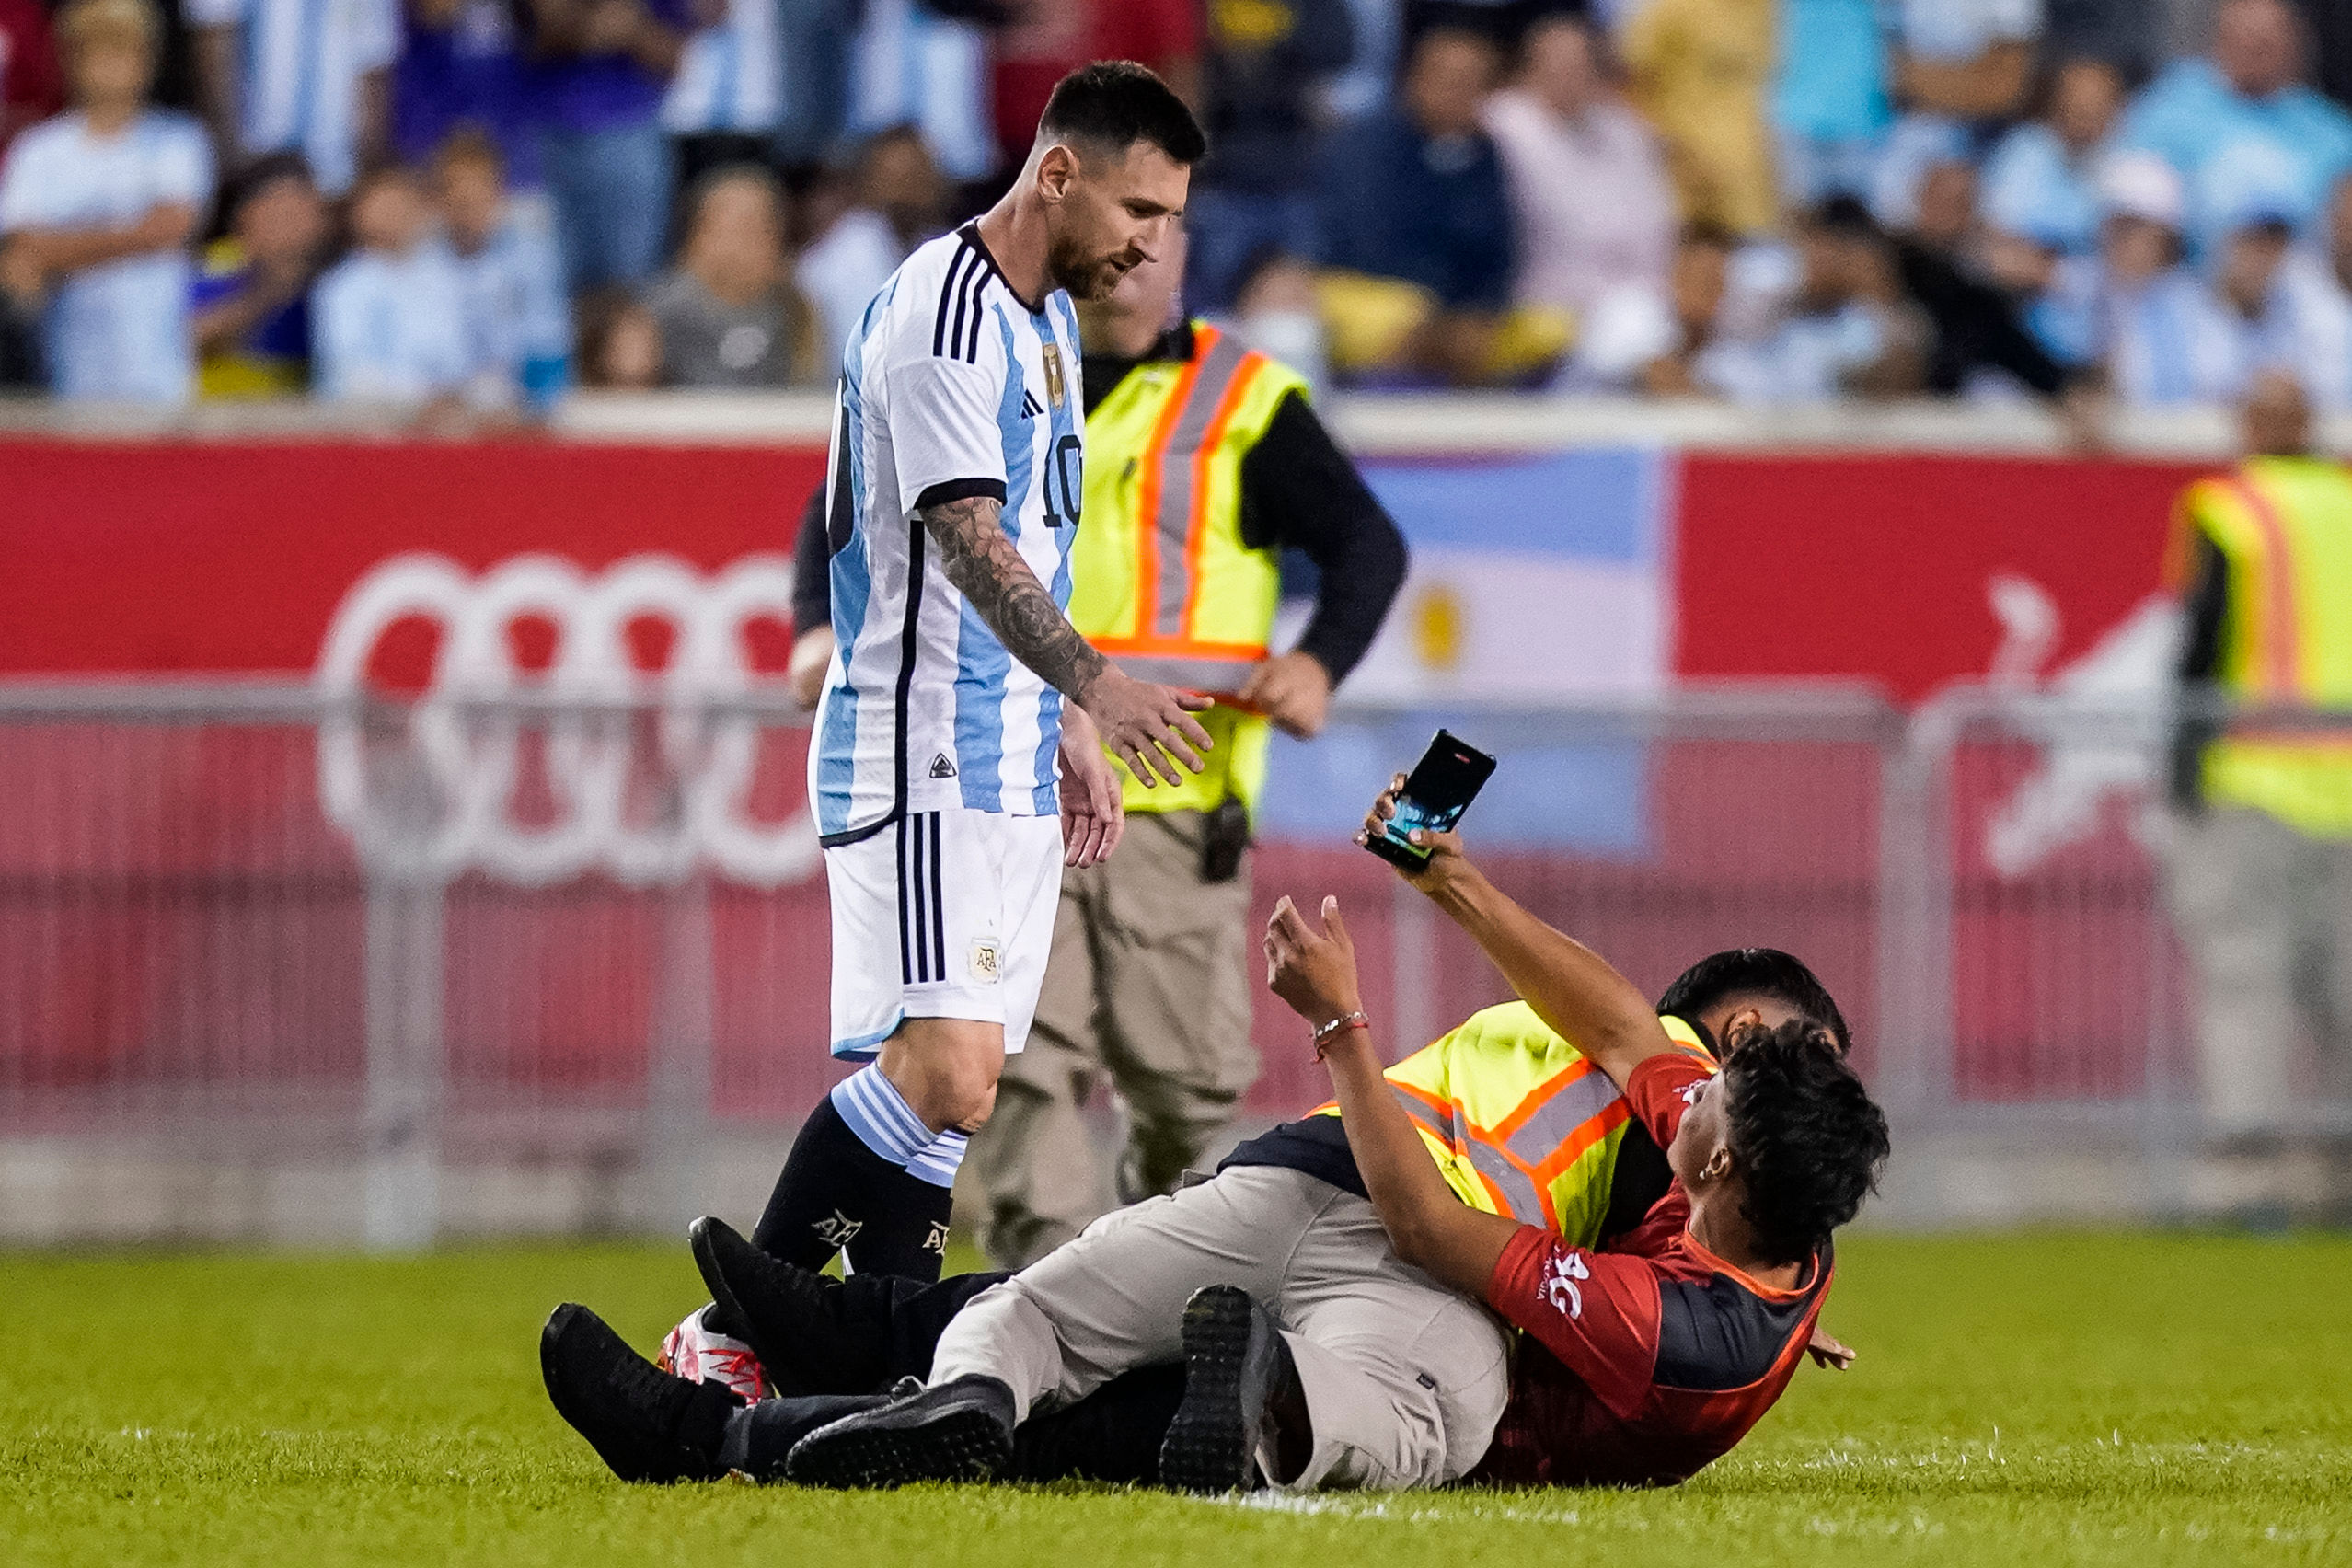 Messi nets two, gets accosted twice, as Argentina beat Jamaica 3-0